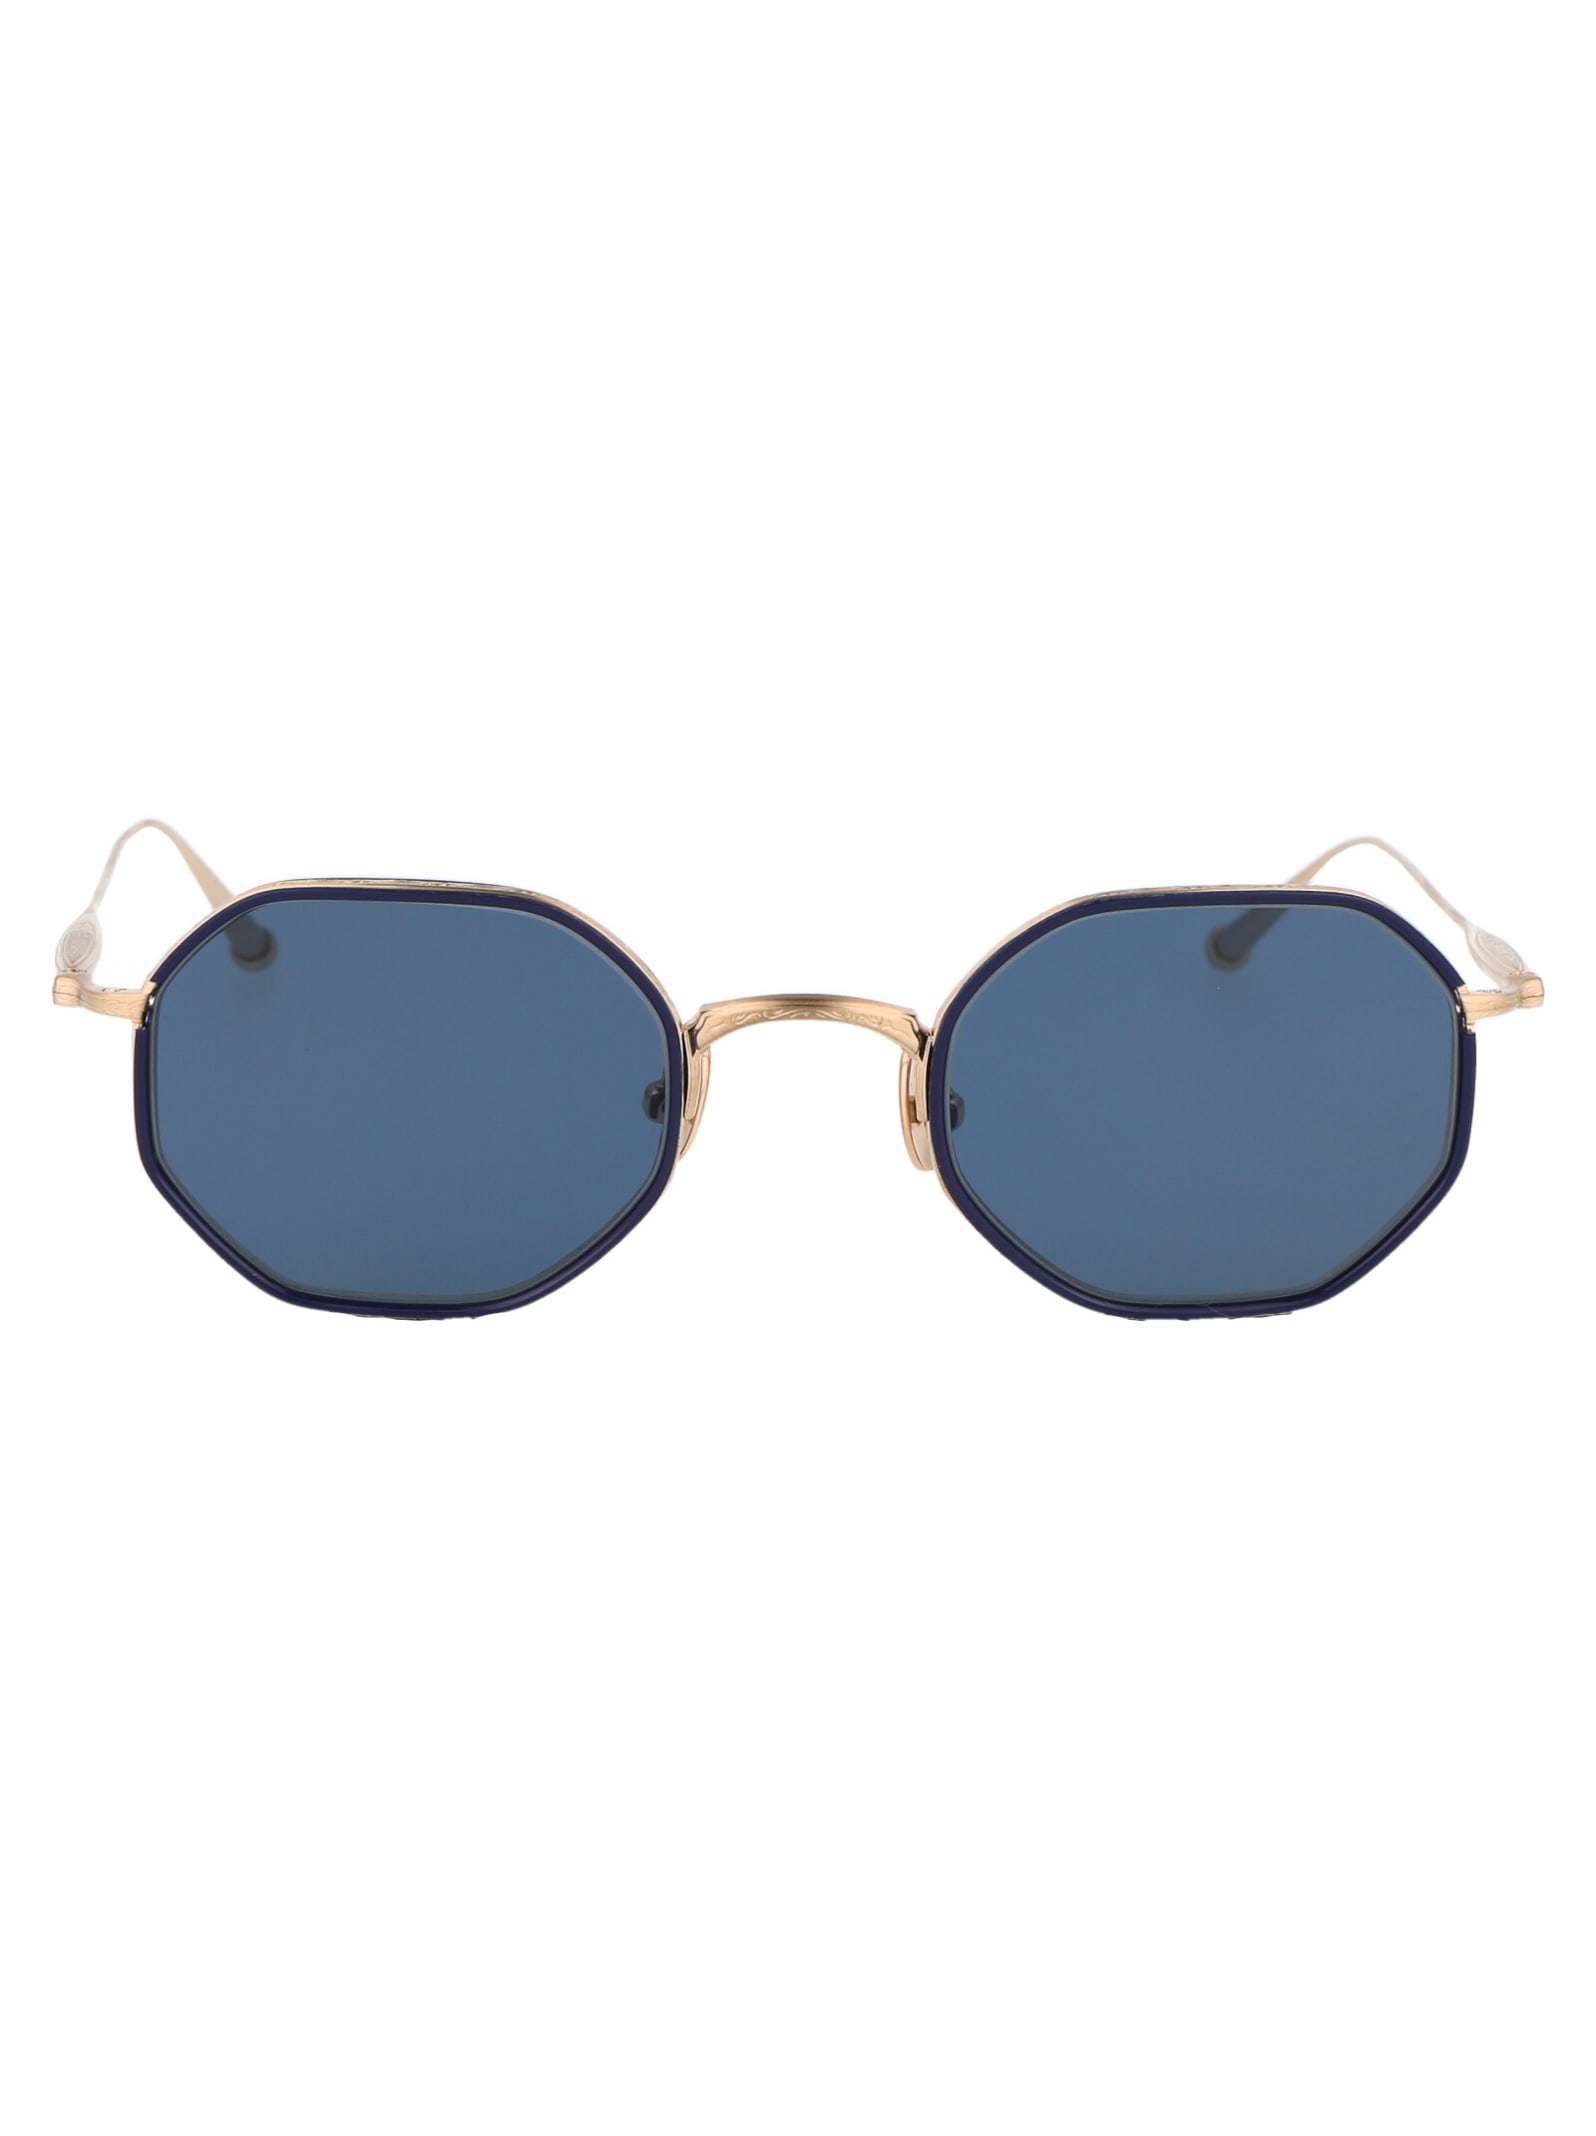 Matsuda M3086-i Sunglasses In Brushed Gold - Navy Solid | ModeSens